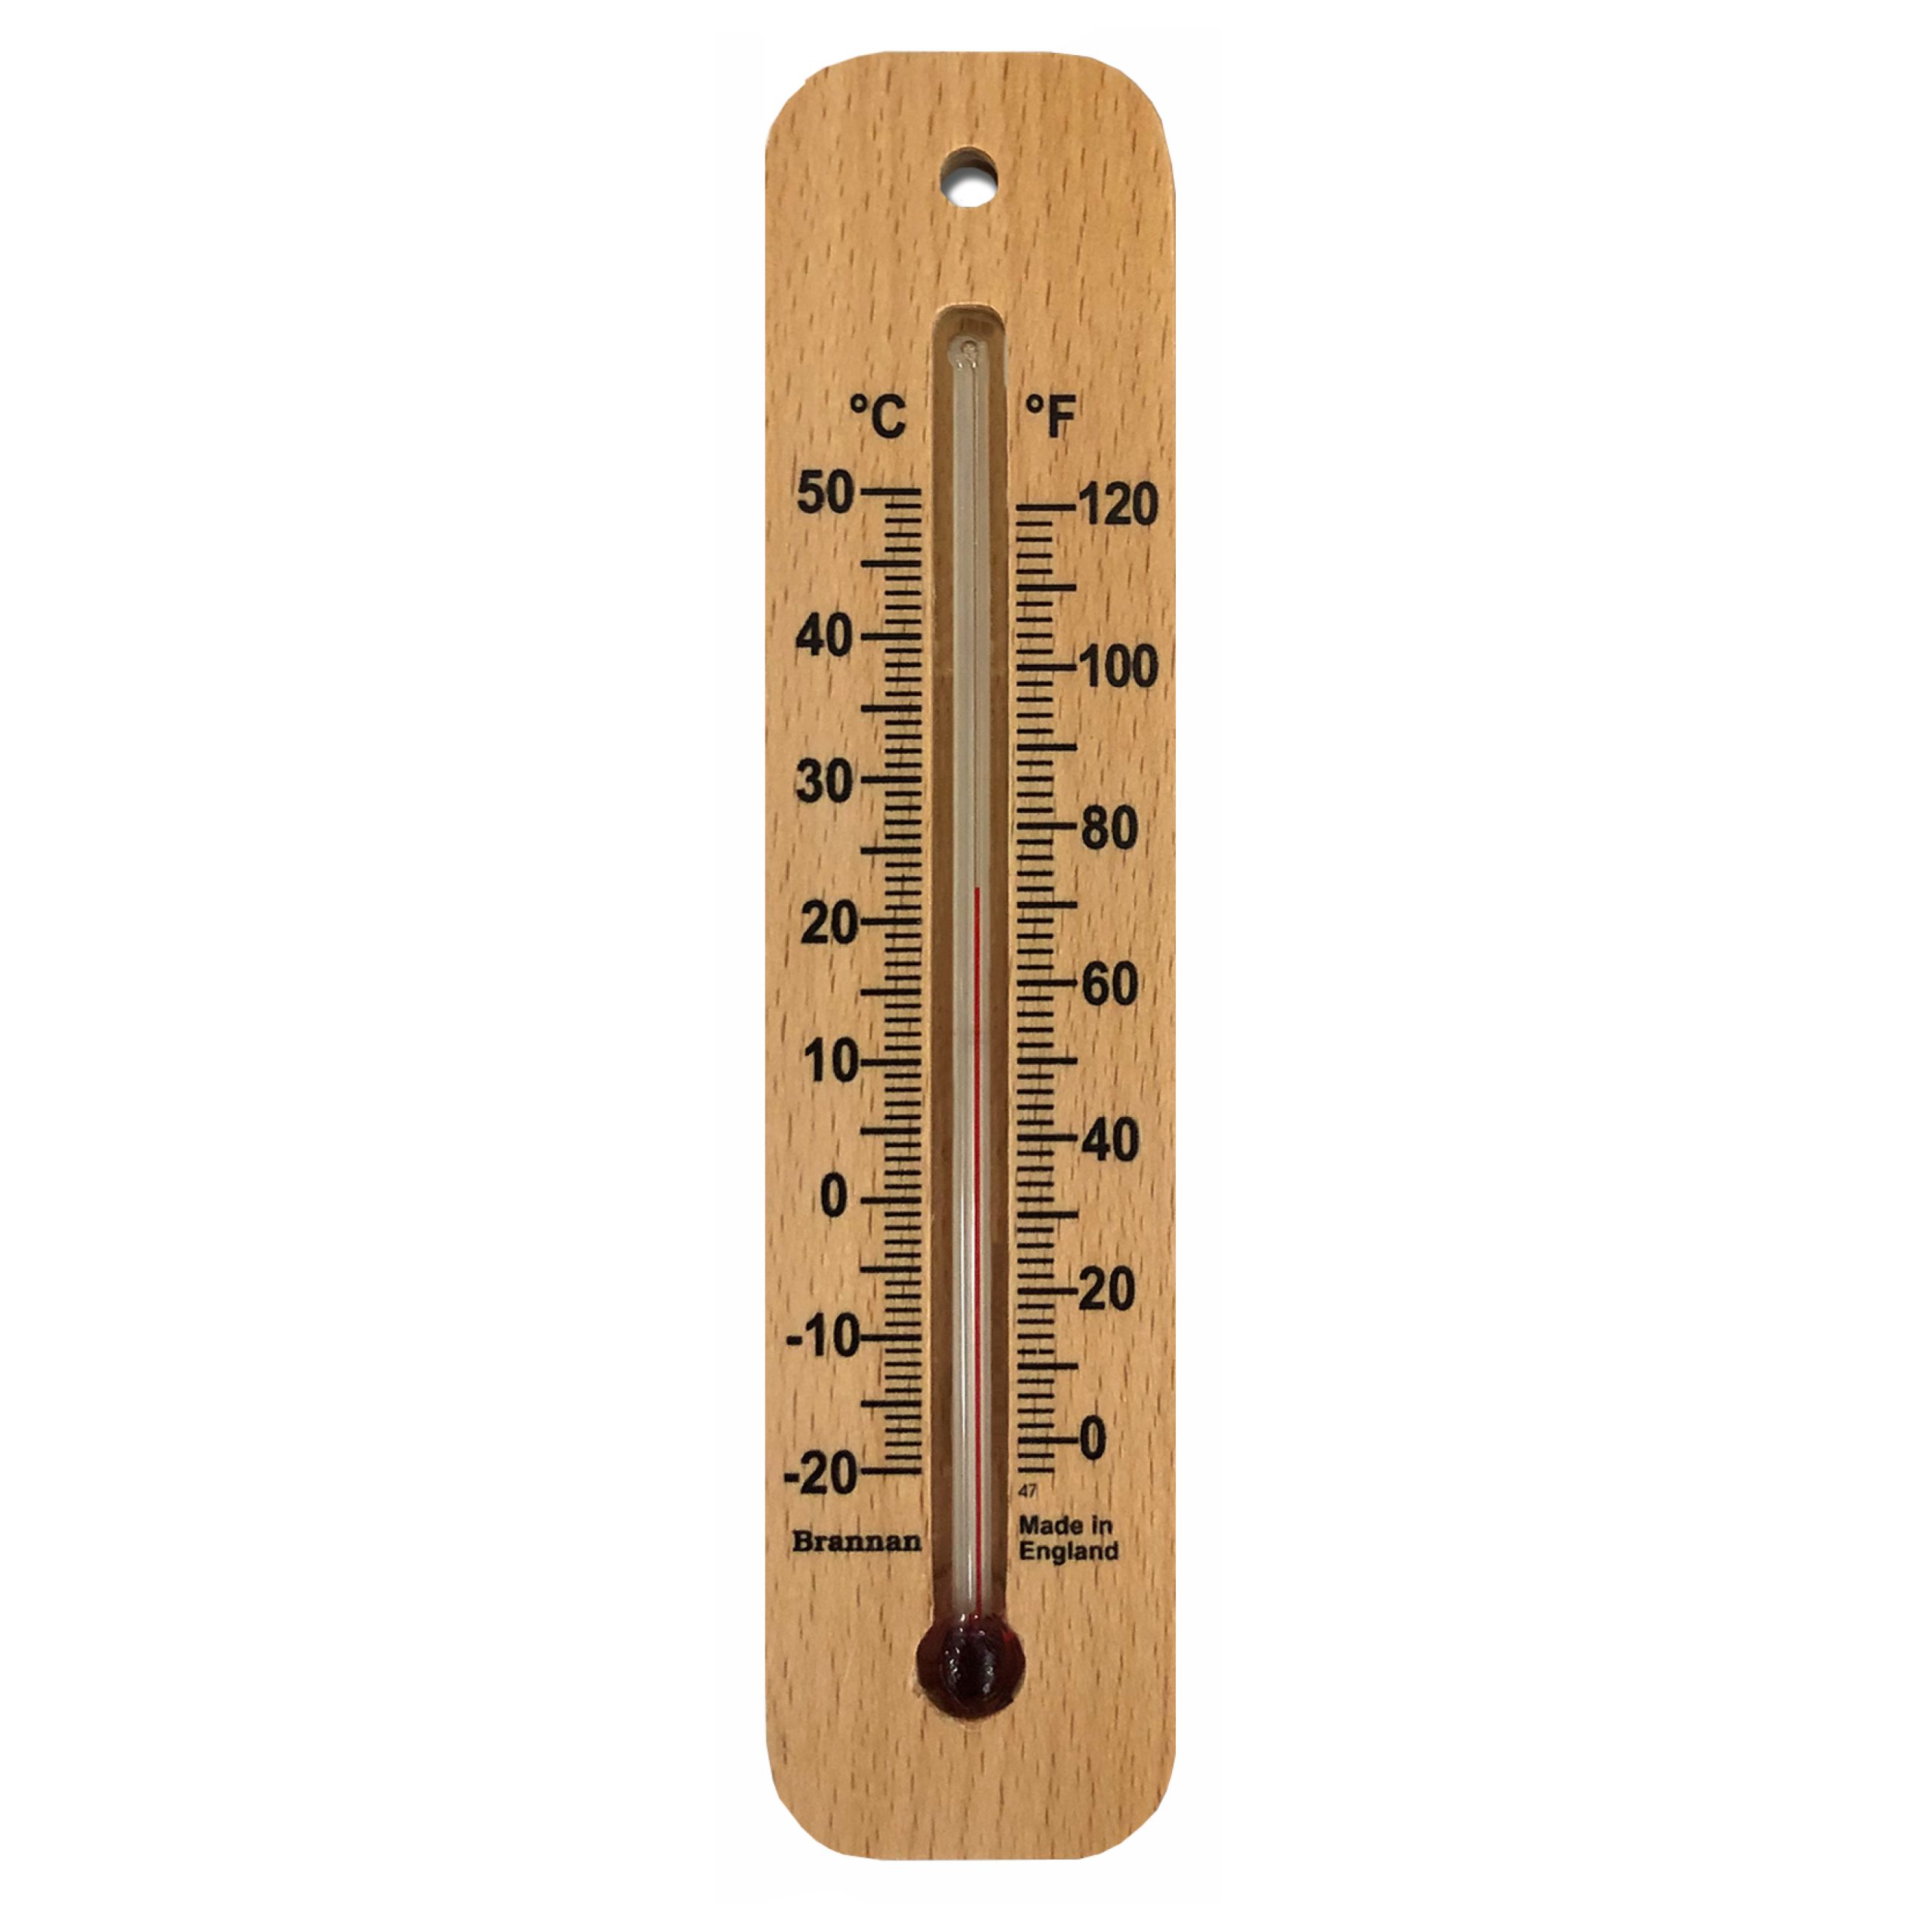 The Best Nursery Thermometers In Australia